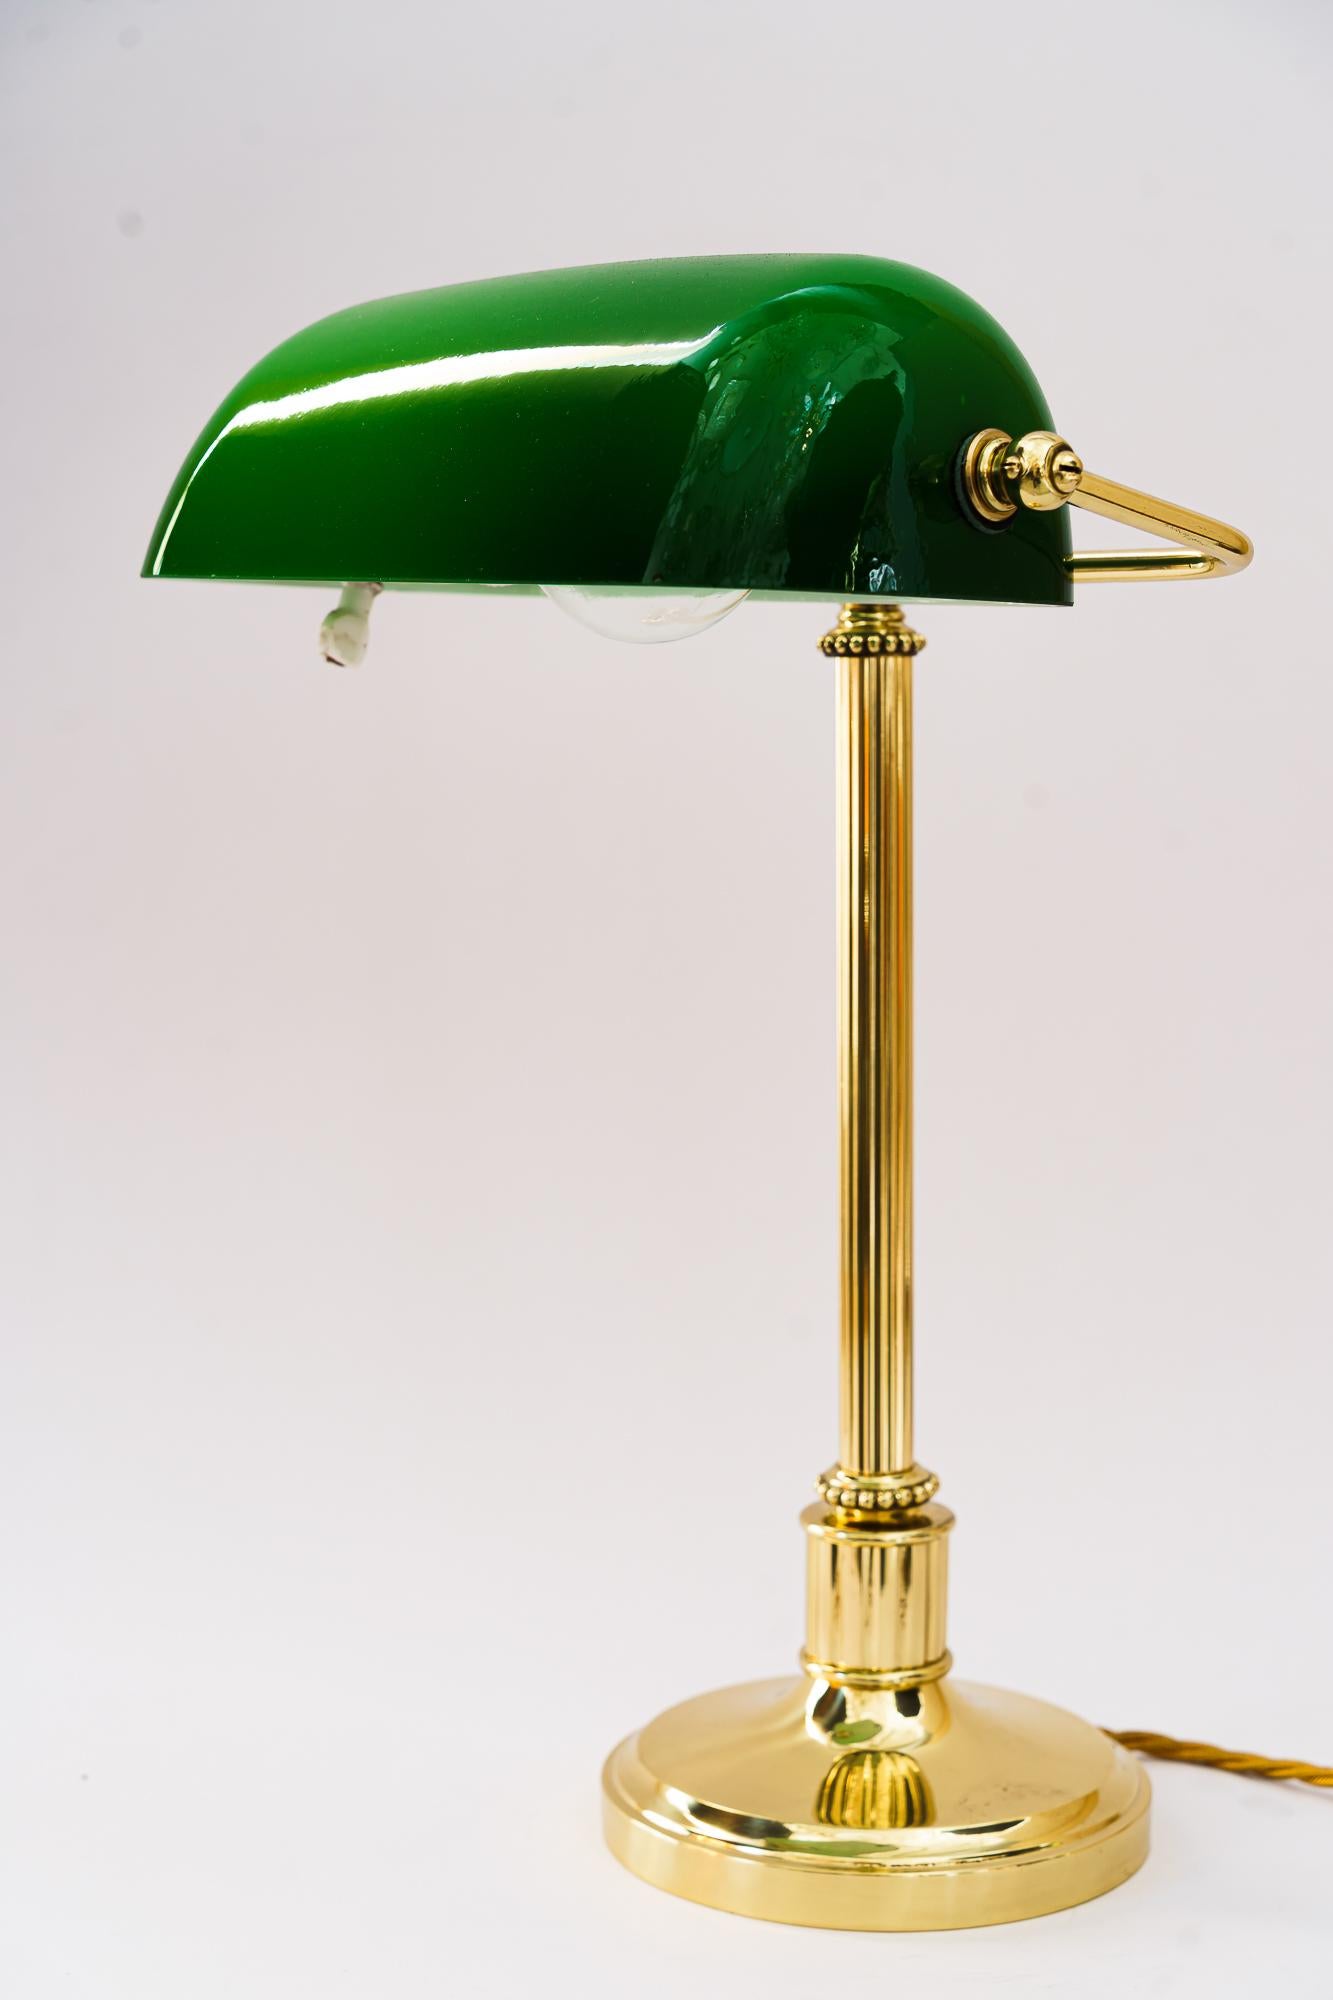 Art deco banker lamp with green glass shade, Vienna, around 1920s.
Brass polished and stove enameled.
Original glass shade.